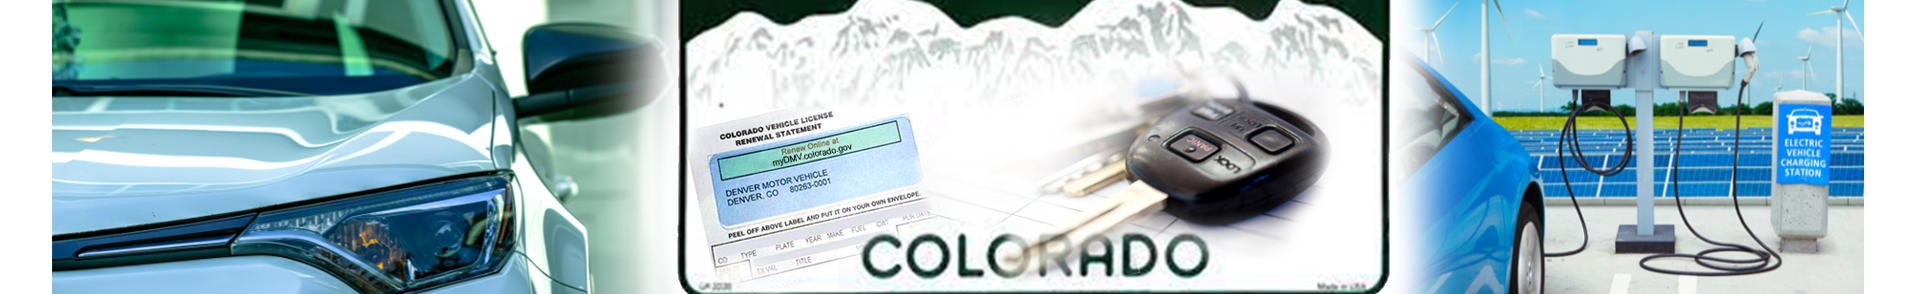 Banner image of the front half of a white car dissolving into a Colorado license plate that contains a set of car keys and registration card that dissolves into a blue electric car at a charging station